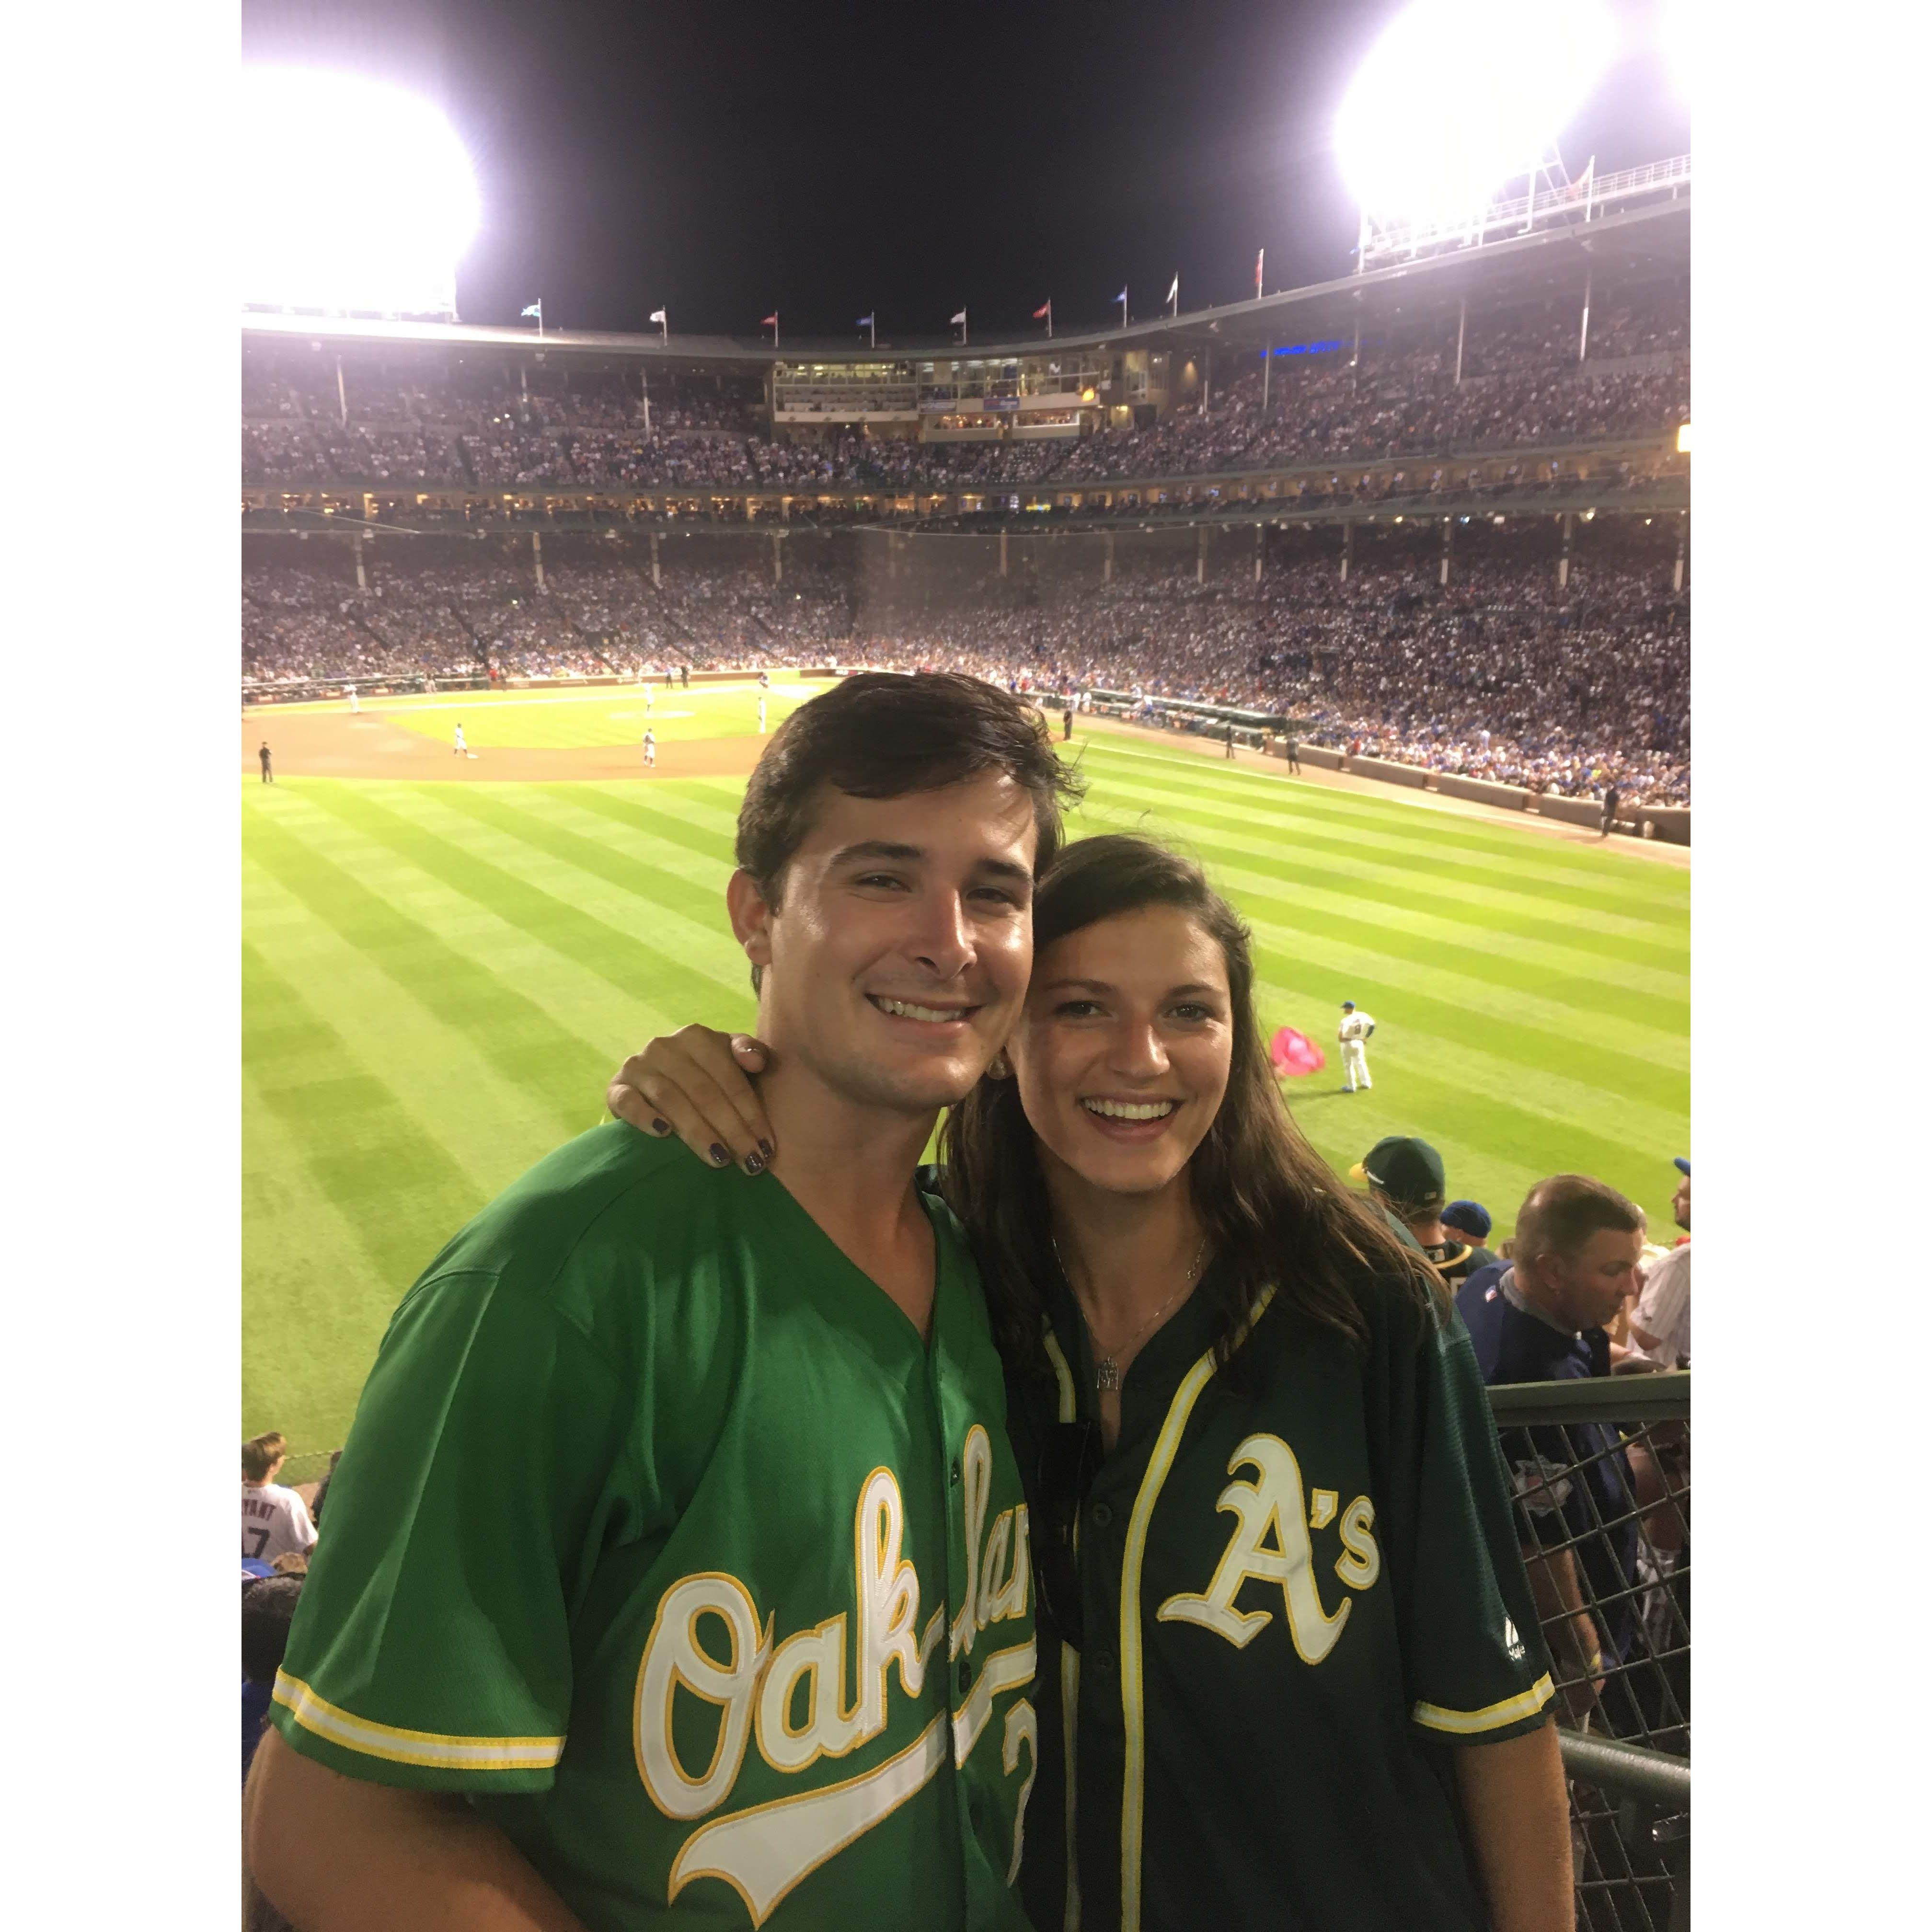 Chicago to see the A's play